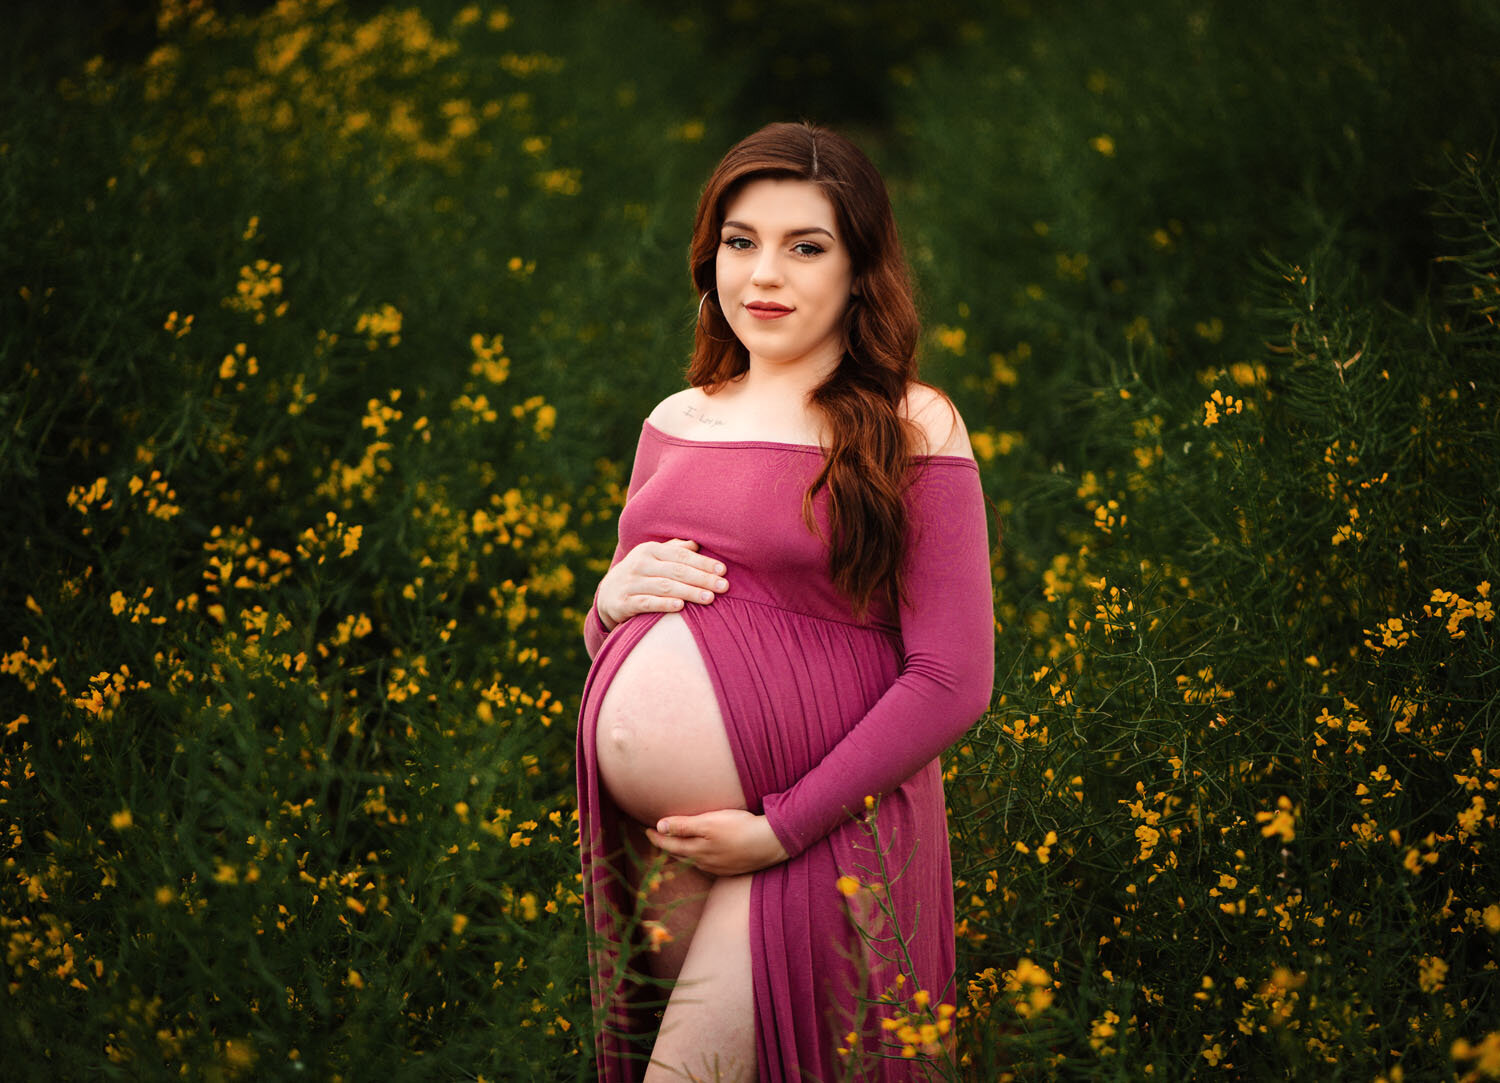  Beautiful maternity session of a young woman in a dress in the yellow rapeseed fields in the ramstein kmc area by family photographer sarah havens  Wunderschönes Schwangerschafts Shooting im Rapsfeld in Rheinland-Pfalz bei Kaiserslautern 